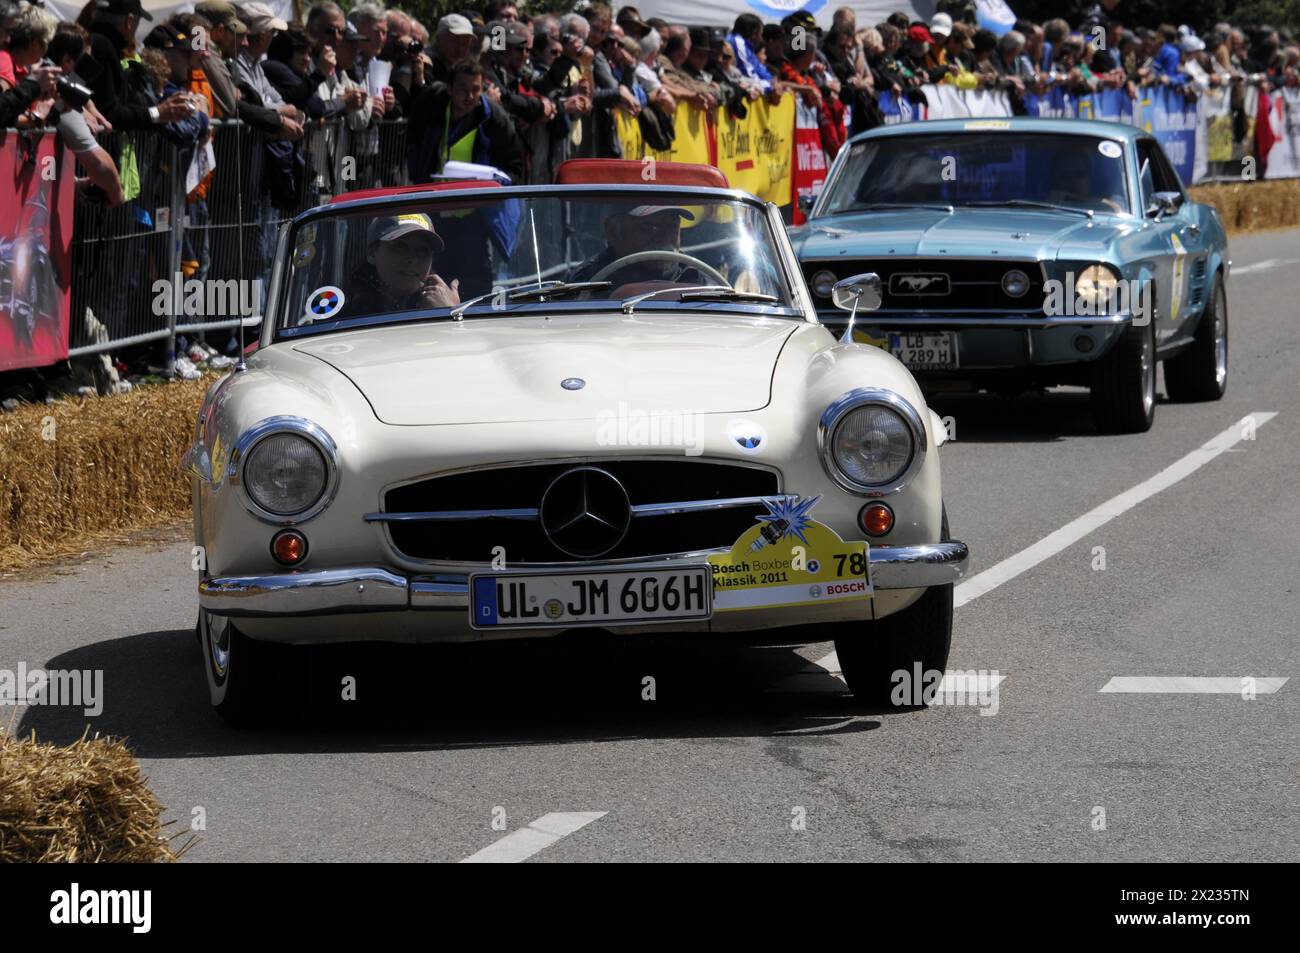 A white Mercedes-Benz vintage cabriolet drives in front of spectators at a road race, SOLITUDE REVIVAL 2011, Stuttgart, Baden-Wuerttemberg, Germany Stock Photo